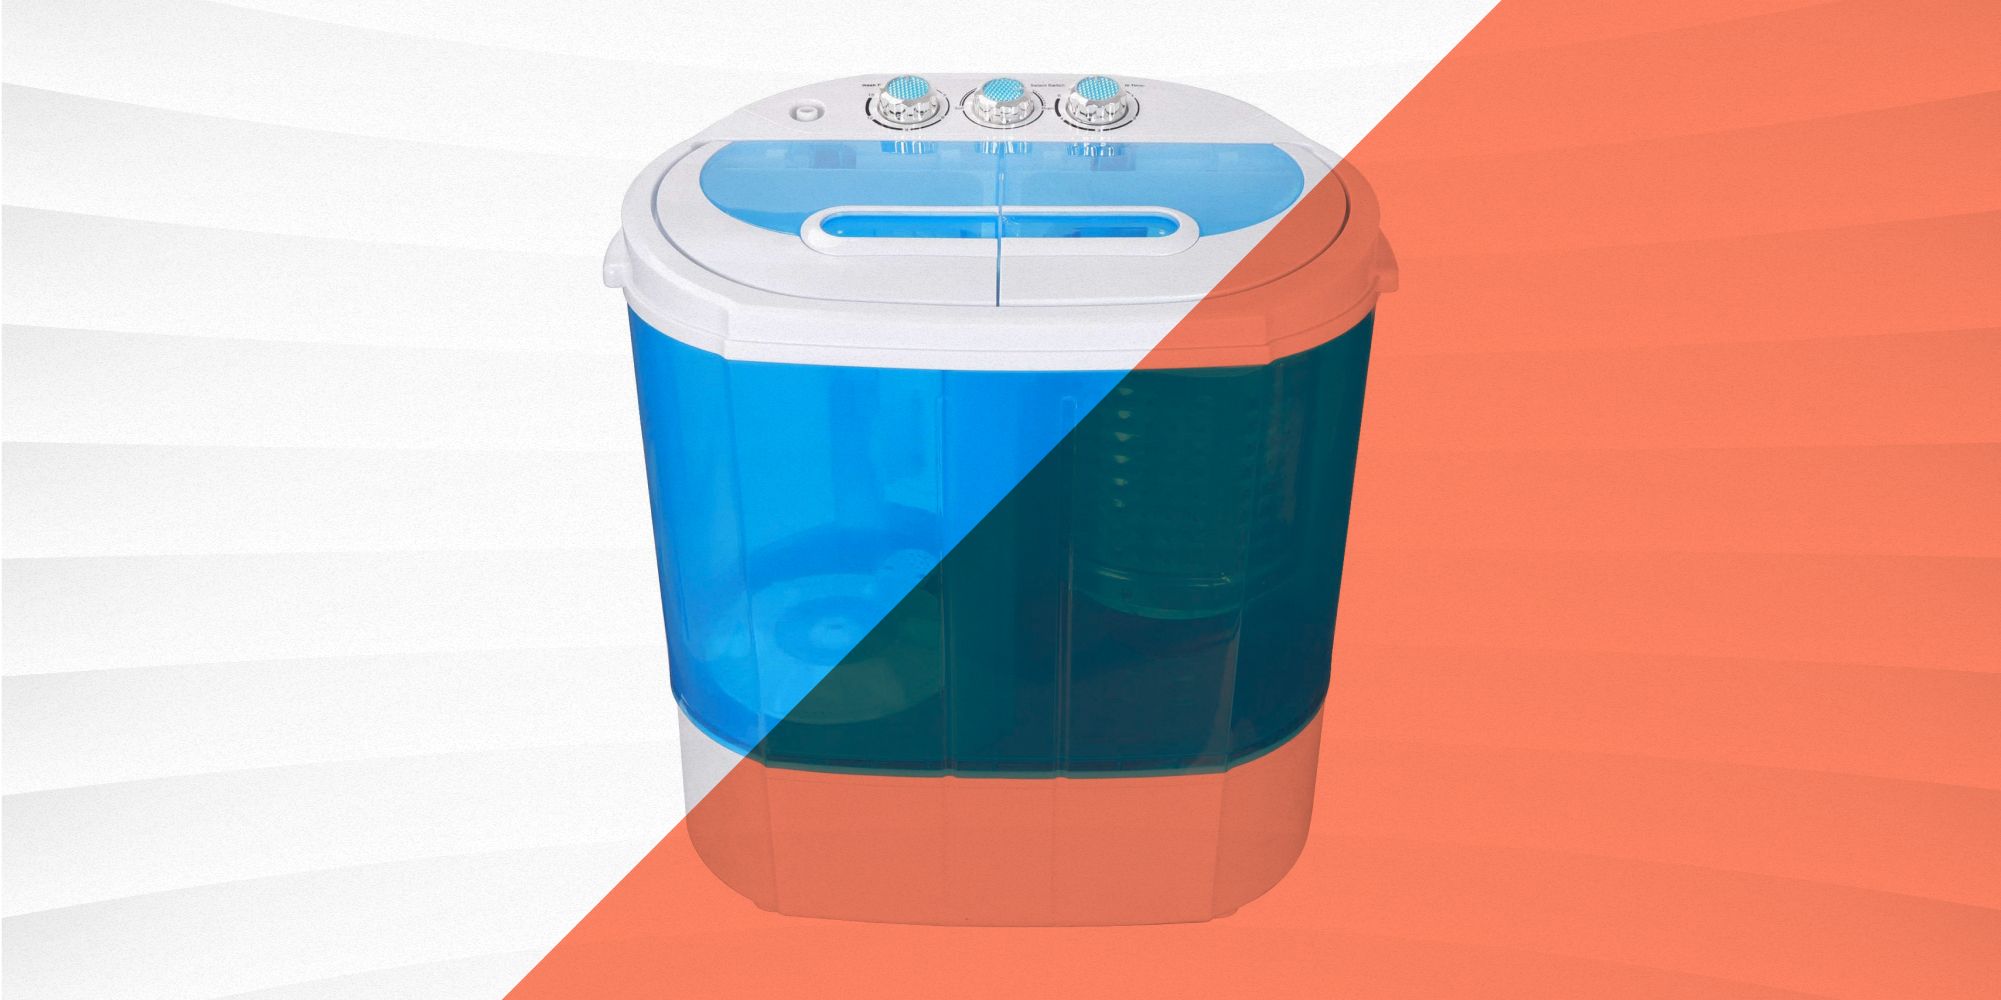 10lbs Capacity Mini Portable Washing Machine for Baby Clothes Compact Laundry Small Semi-Automatic Compact Washer with Timer Control Single Translucent Tub 